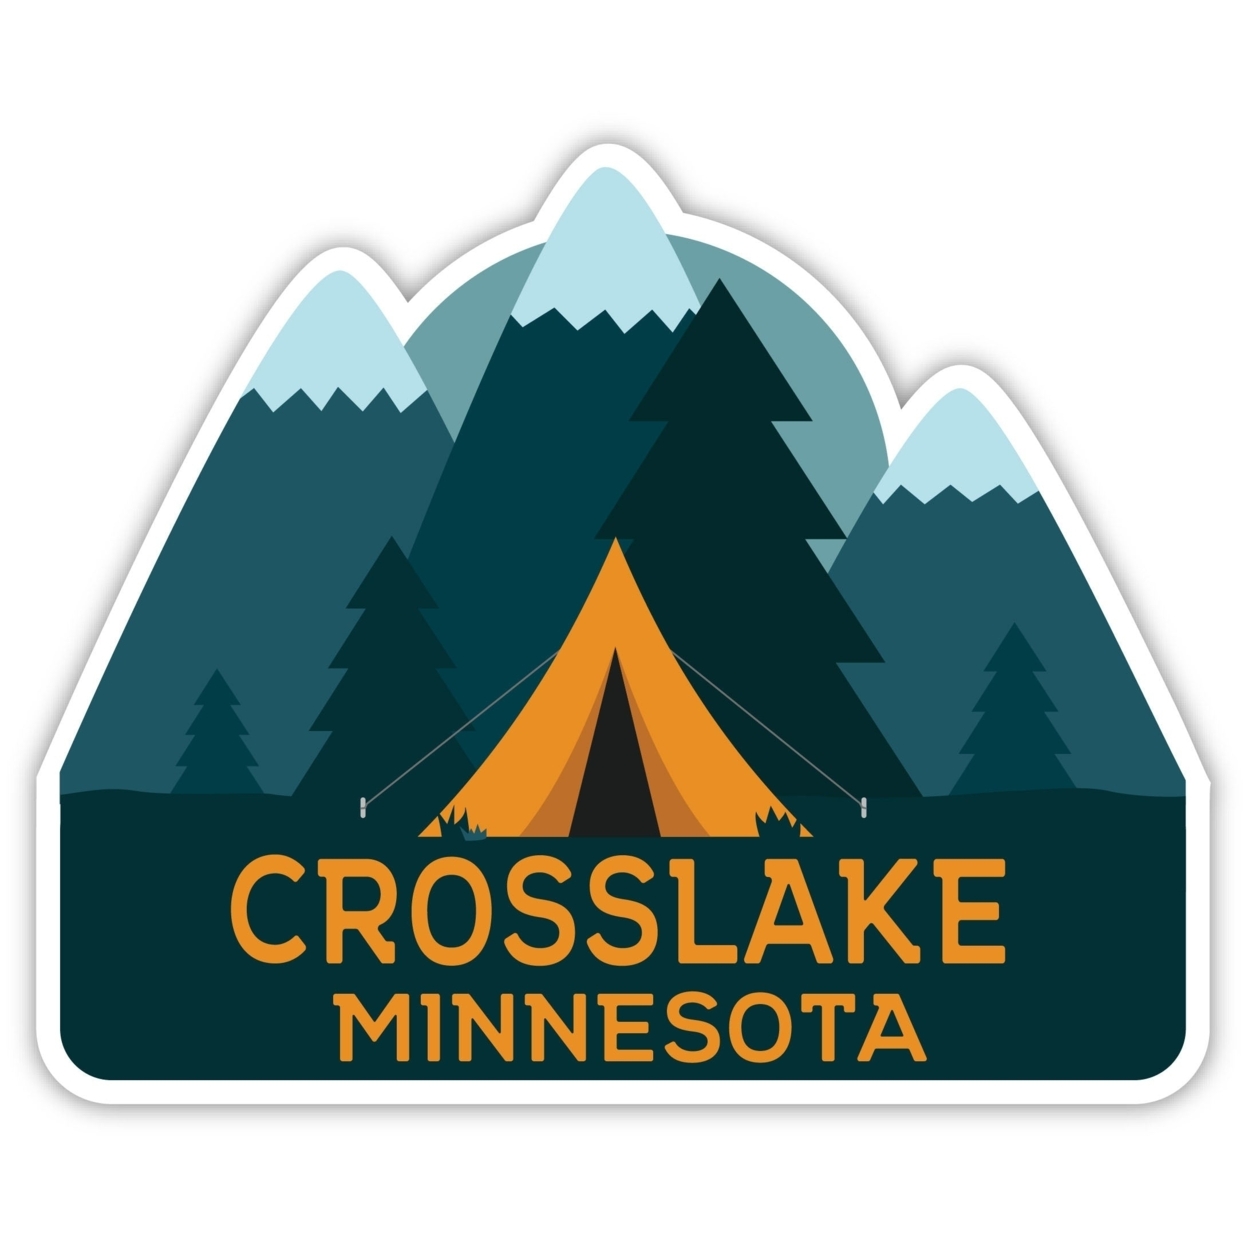 Crosslake Minnesota Souvenir Decorative Stickers (Choose Theme And Size) - 4-Pack, 6-Inch, Tent